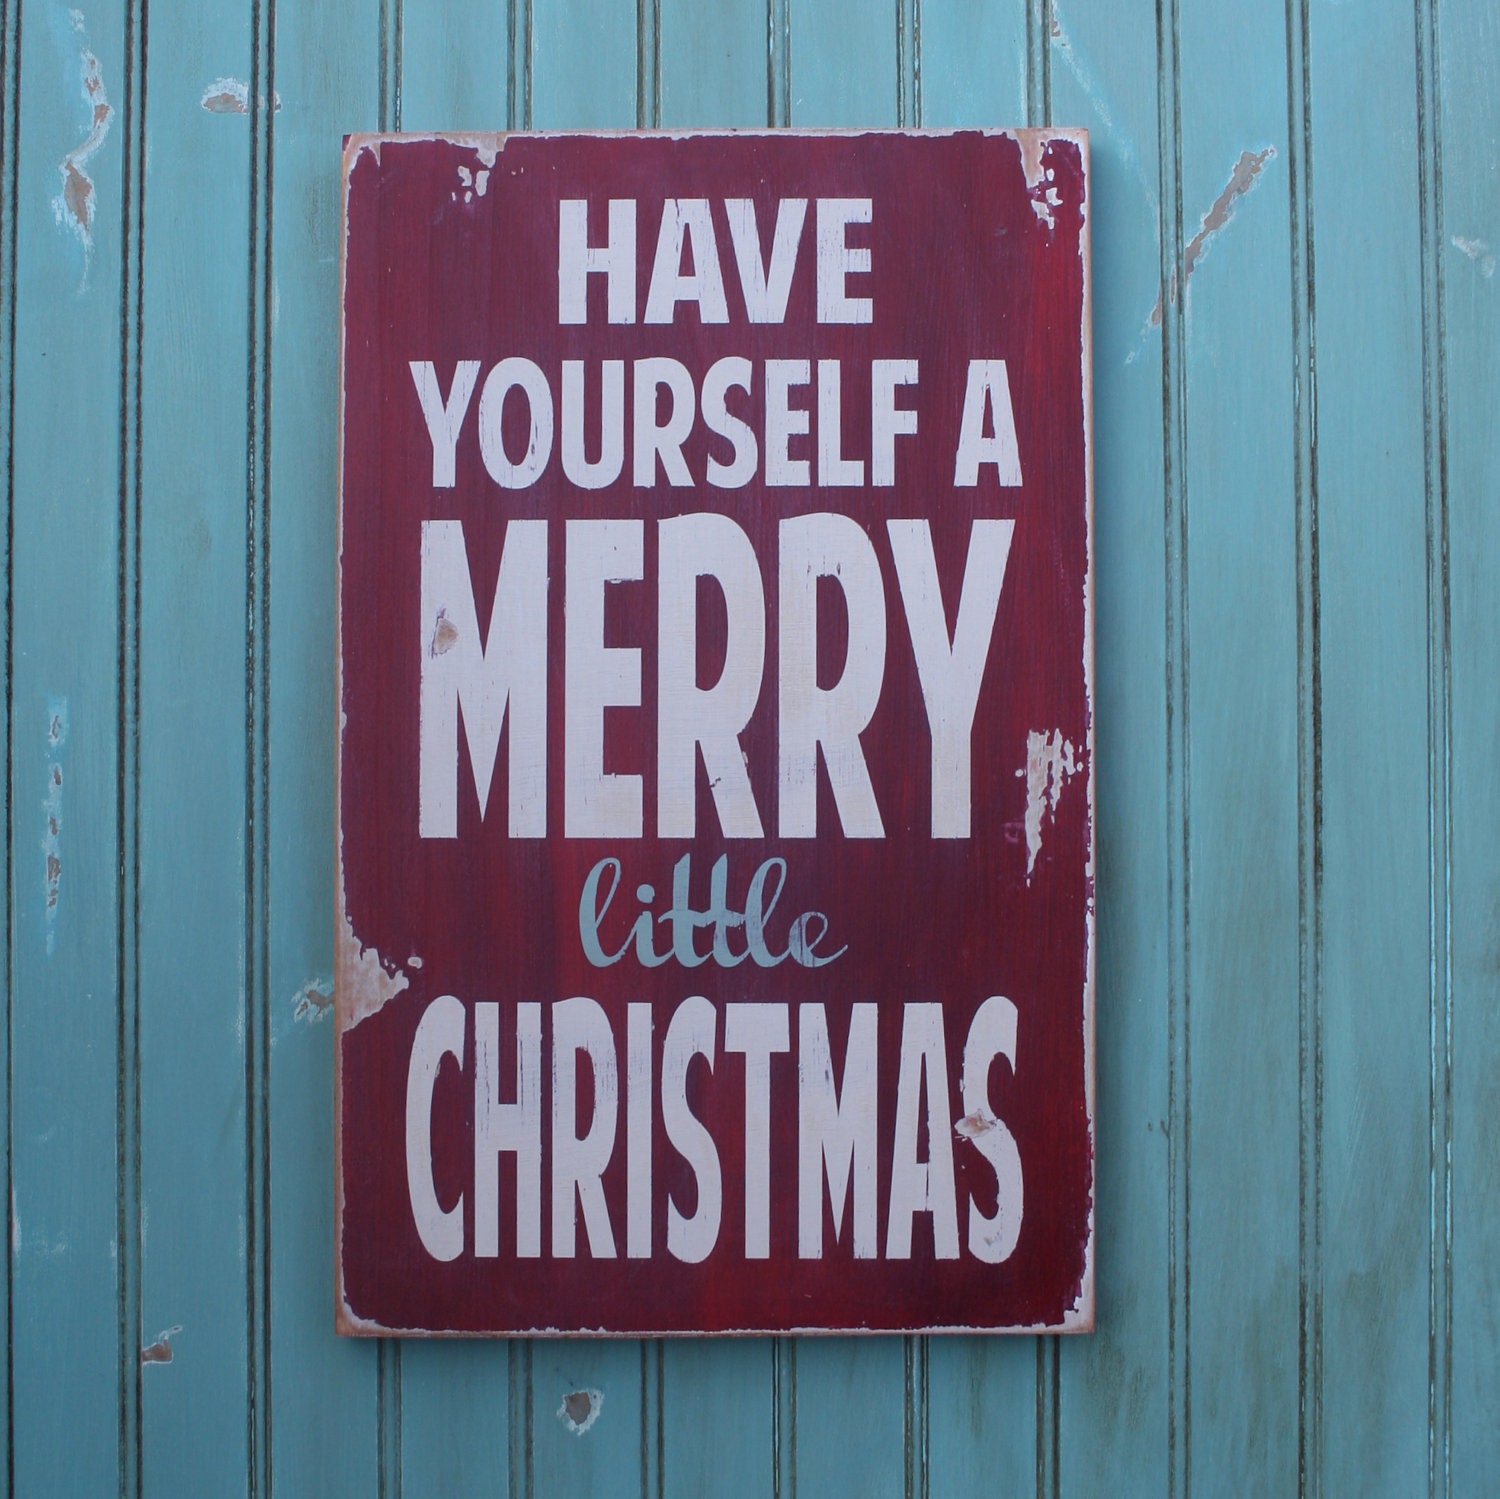 Have Yourself a Merry Little Christmas Heavily Distressed Typography Word Art Sign in Vintage Style